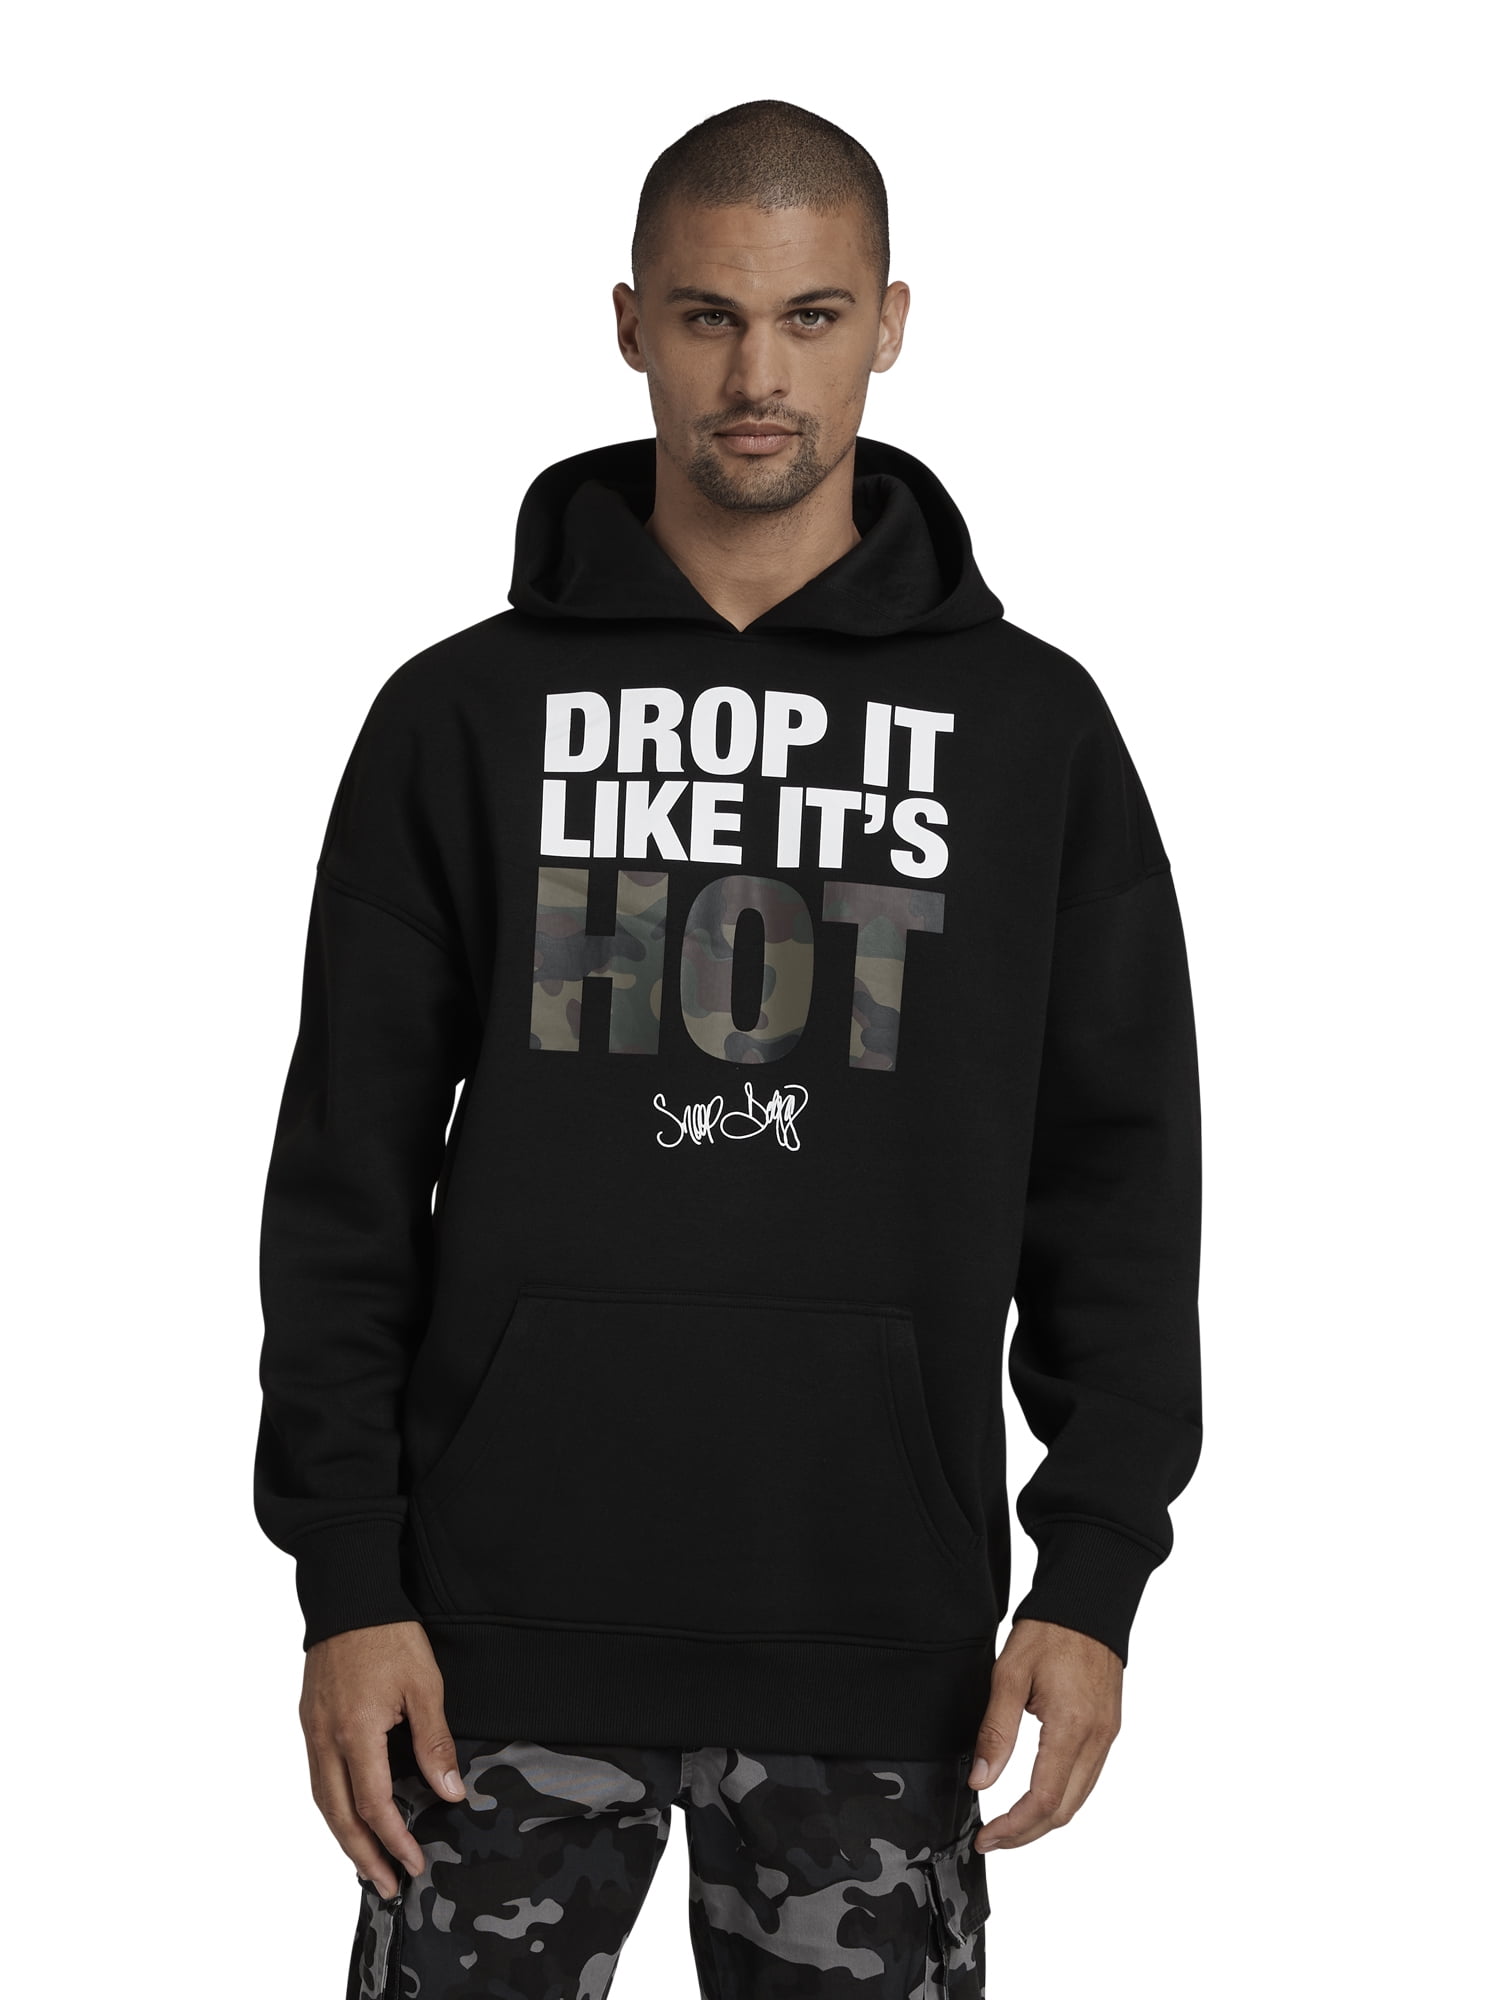 Dogg Supply by Snoop Dogg Men's Graphic Hoodie, Sizes XS-3XL - Walmart.com